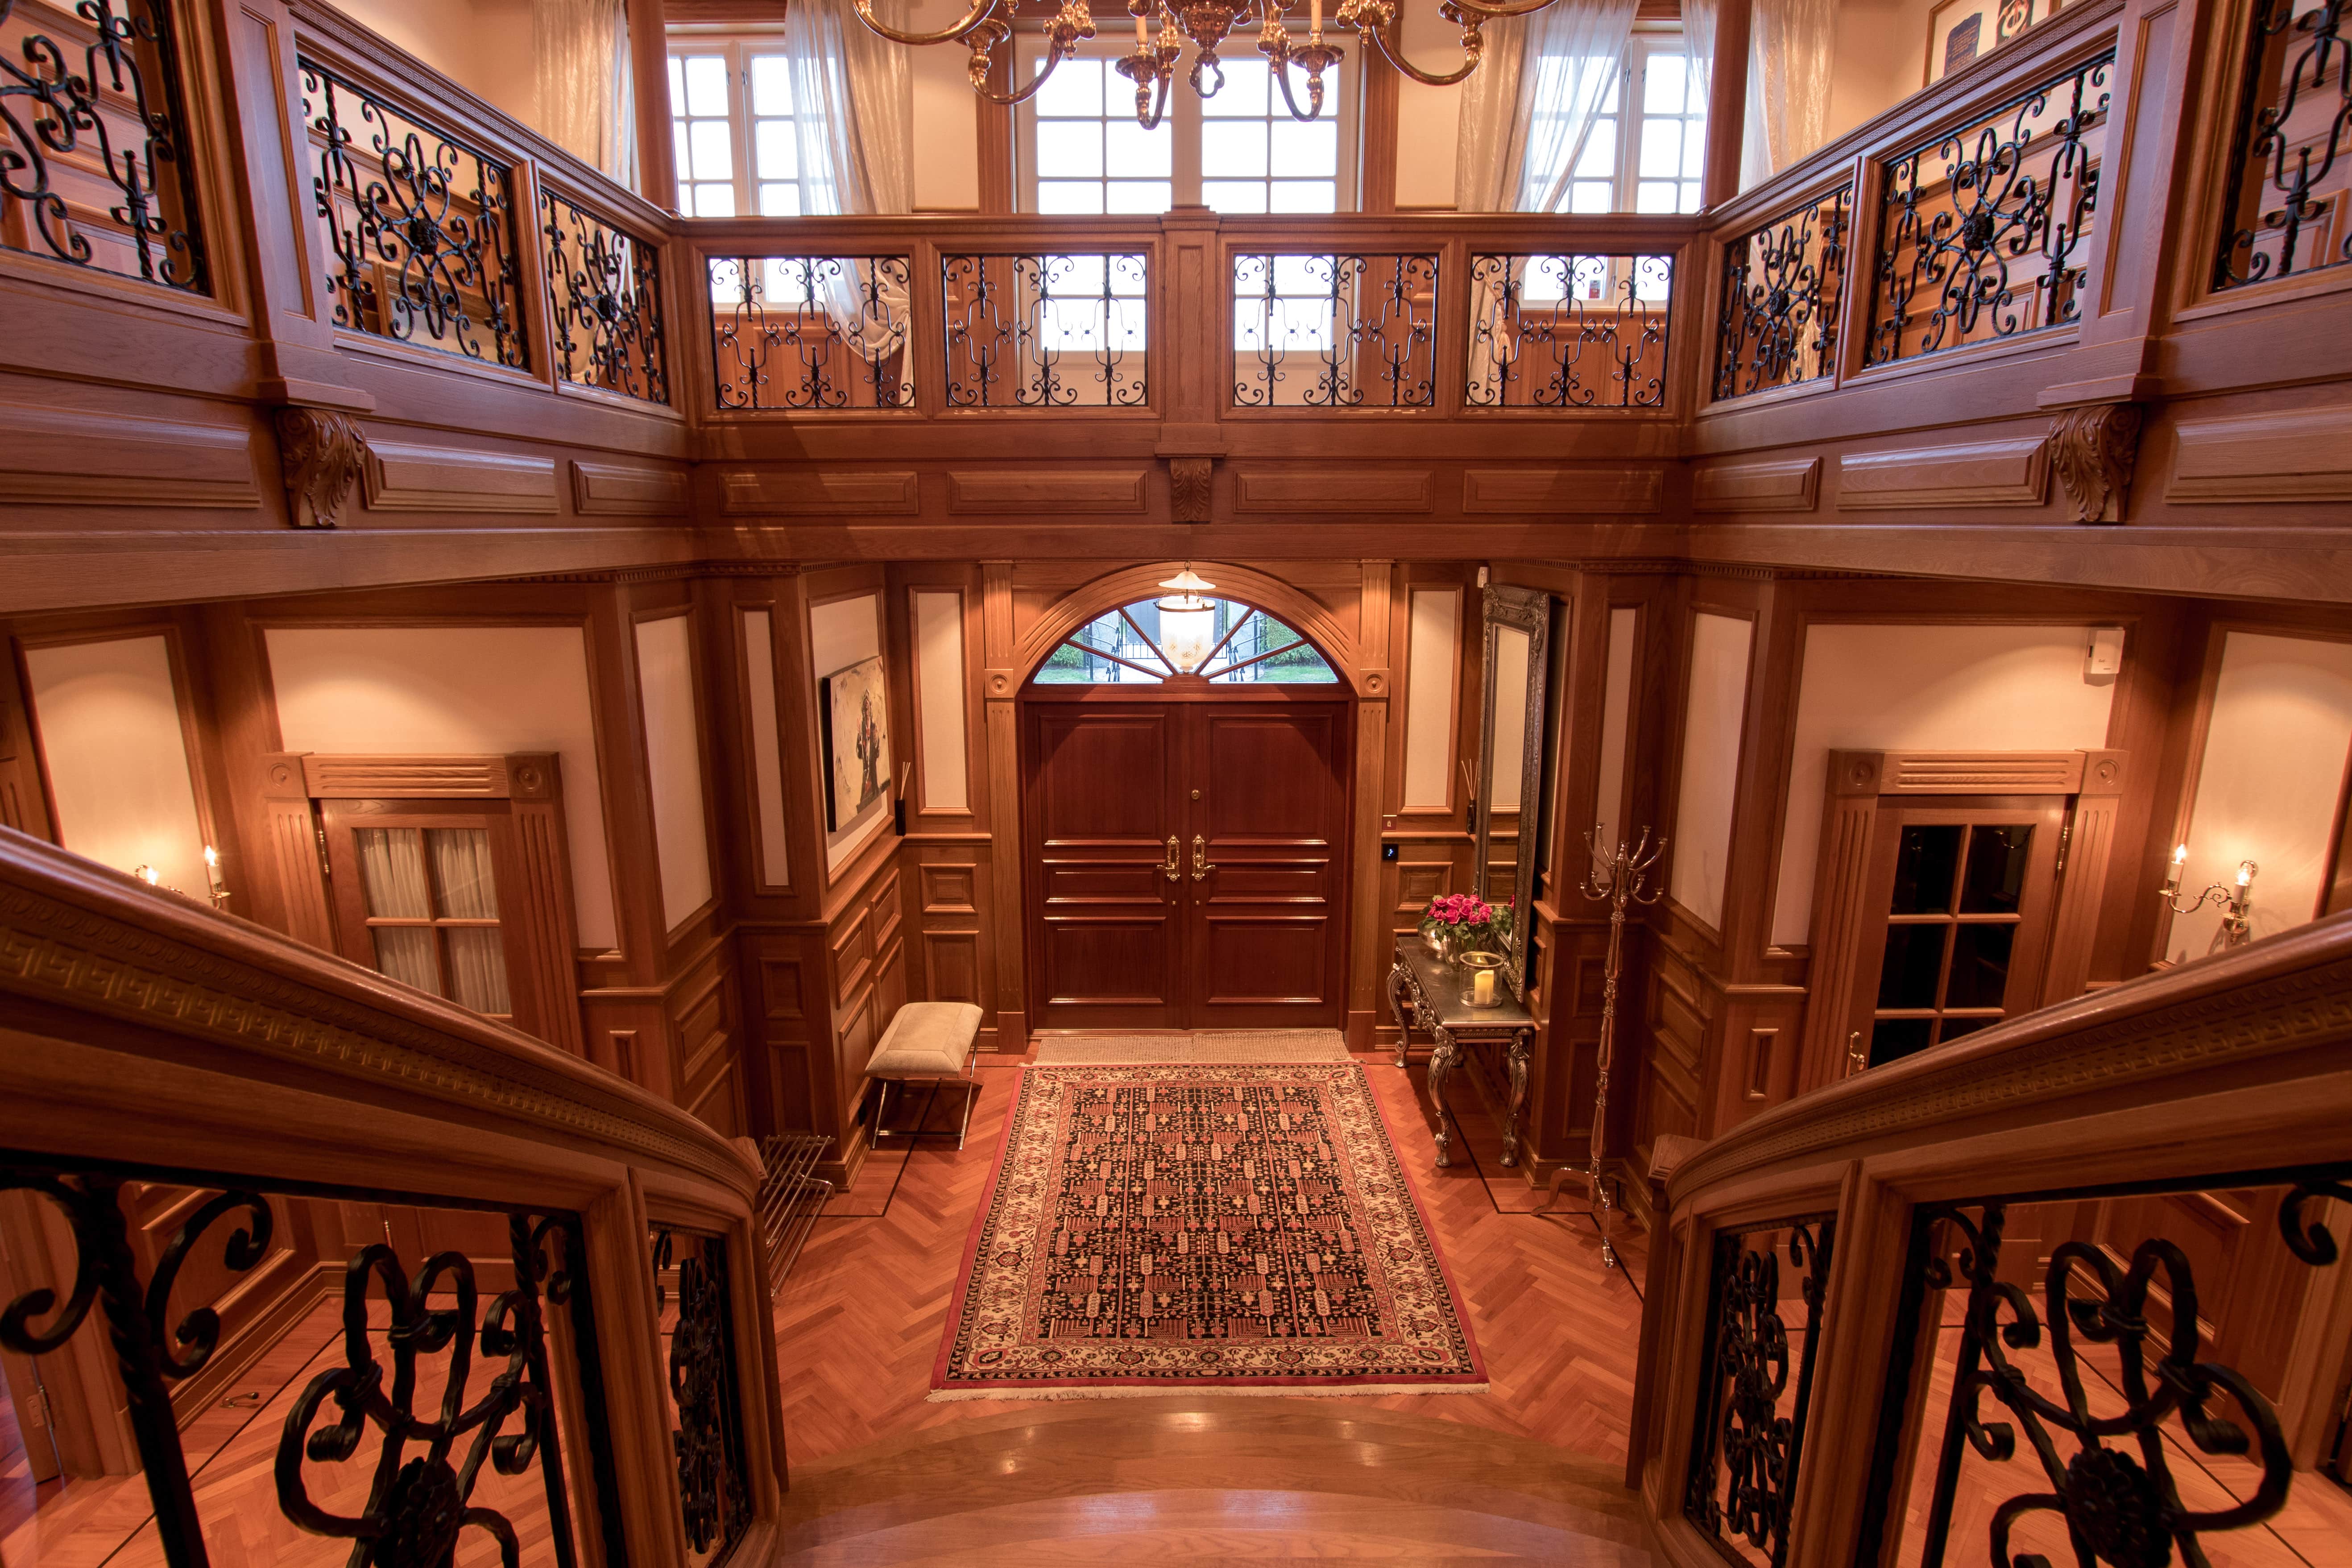 Step inside the main door and behold the sight of a one of a kind mansion.